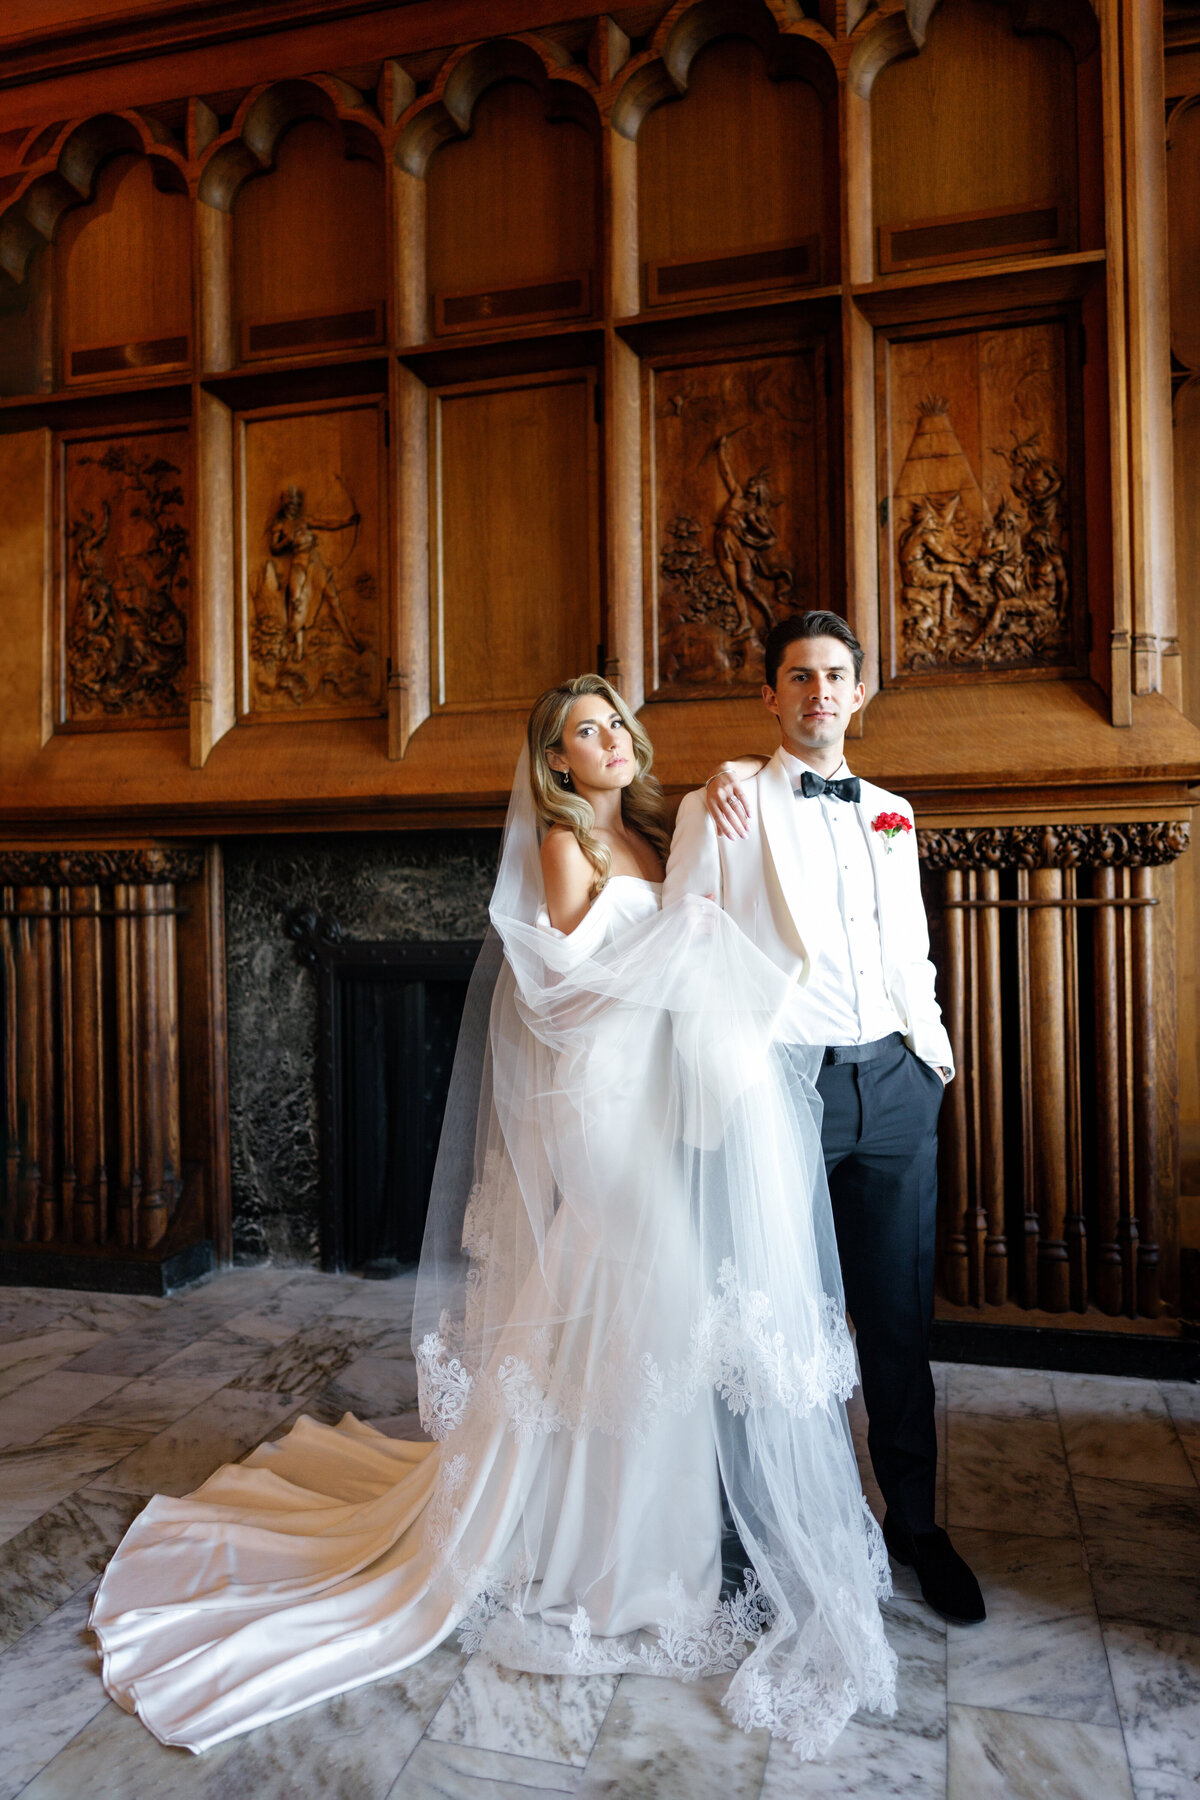 Aspen-Avenue-Chicago-Wedding-Photographer-Chicago-Athletic-Association-Simplicitee-XO-Design-Co-St-Mary-of-the-Angels-Church-Anomalie-Beauty-Timeless-Vogue-127